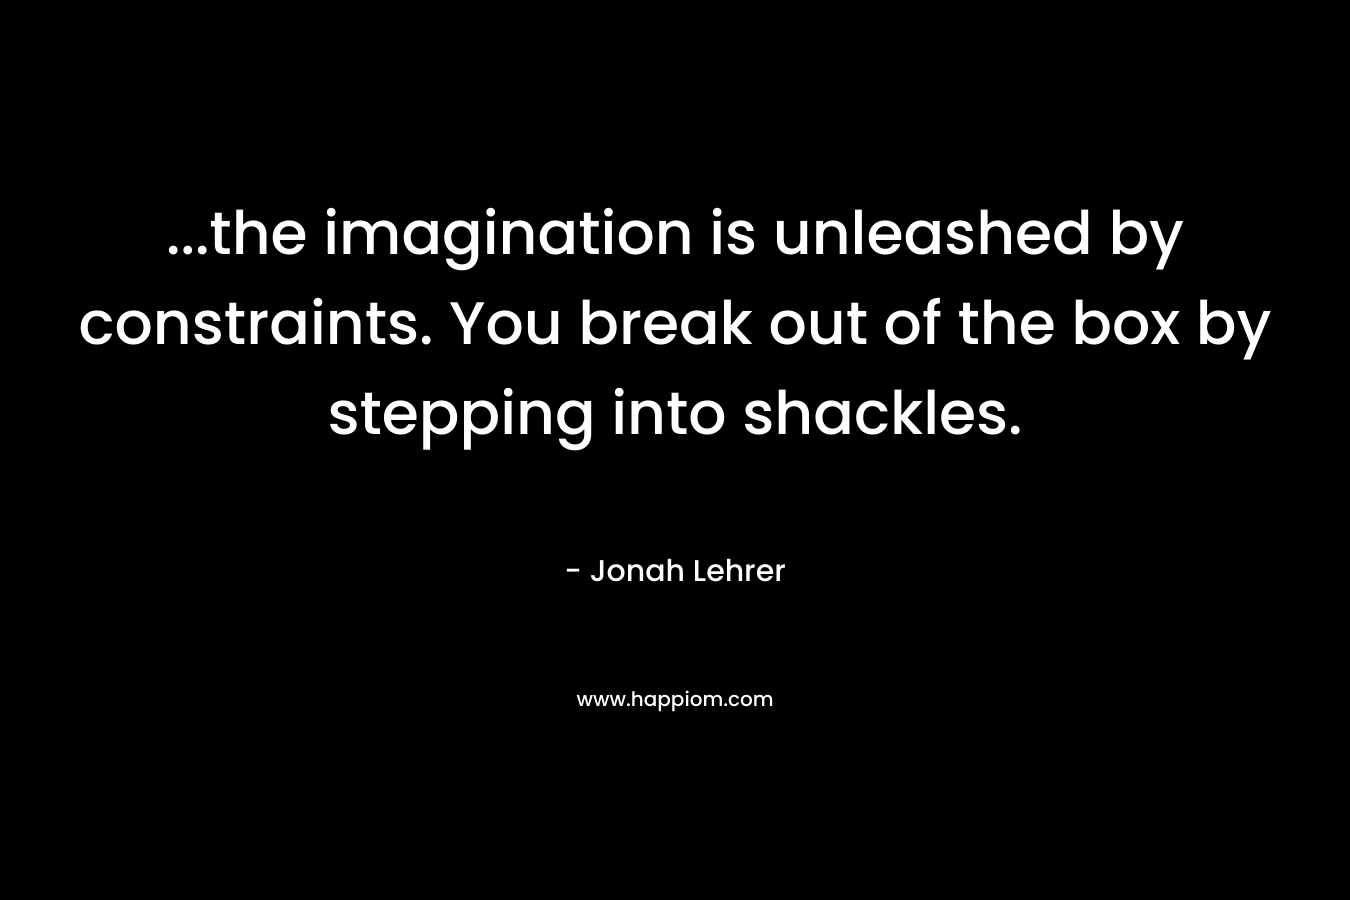 …the imagination is unleashed by constraints. You break out of the box by stepping into shackles. – Jonah Lehrer